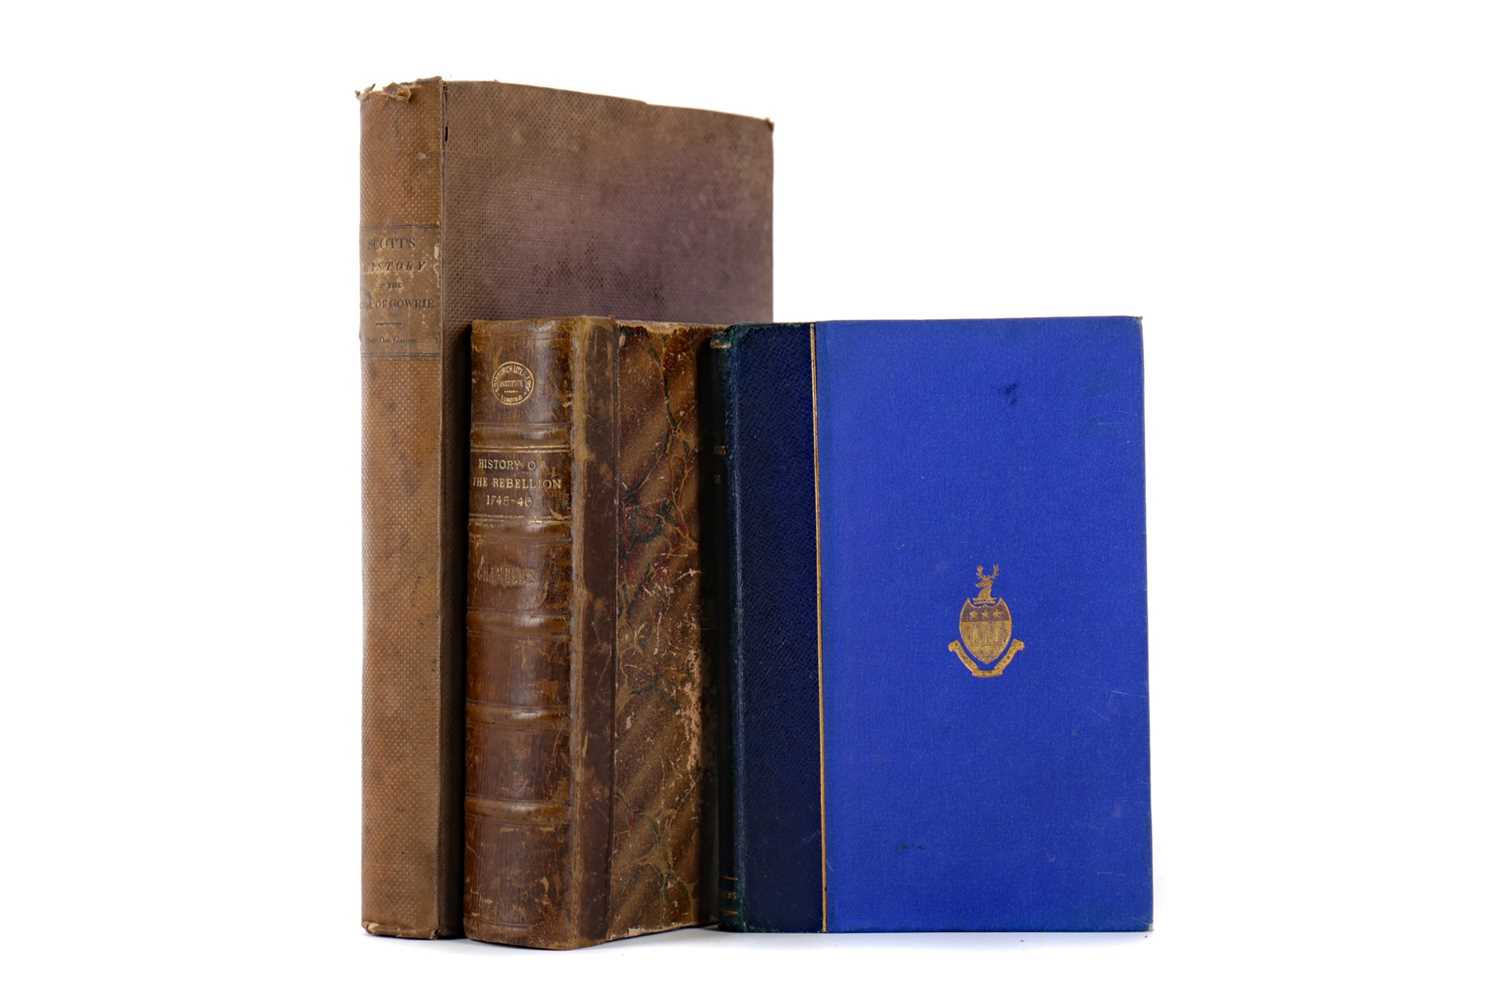 Lot 1129 - THE THREIPLANDS OF FINGASK BY ROBERT CHAMBERS AND TWO OTHER VOLUMES